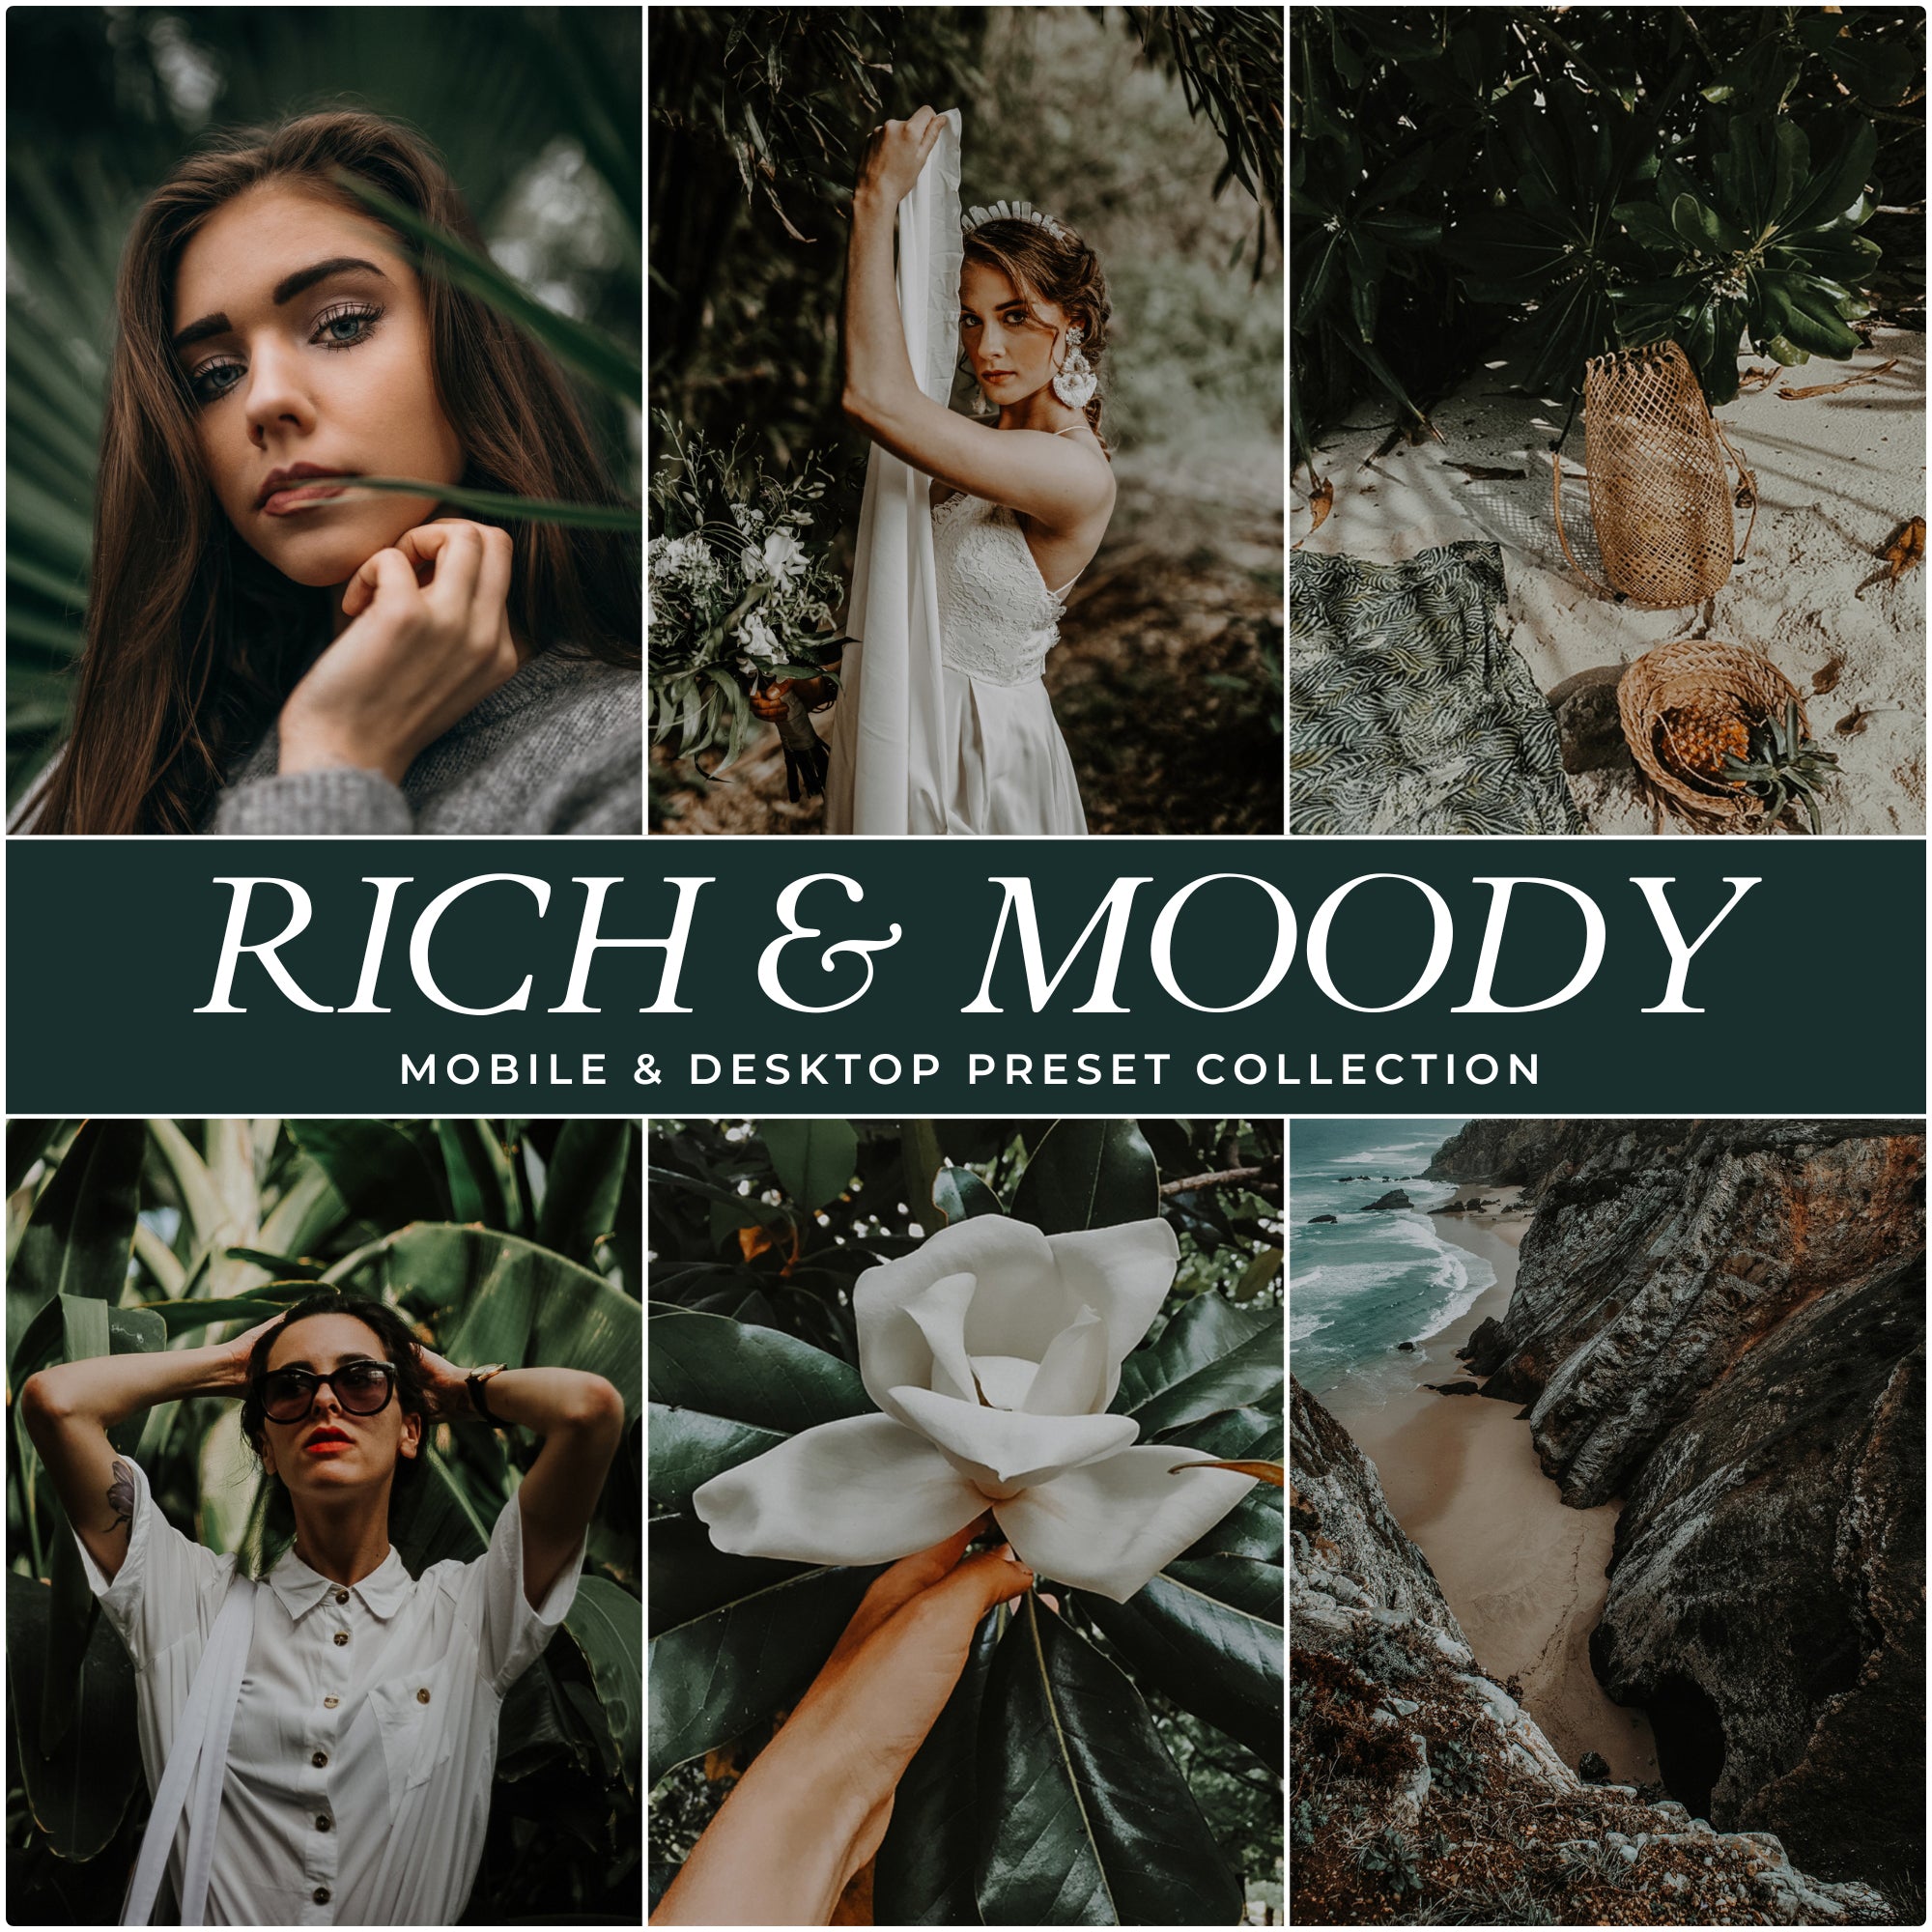 The Best Rich & Moody Lightroom Presets For Photographers and Instagram Influencers Photo Editing In Adobe Lightroom By Lou And Marks Presets